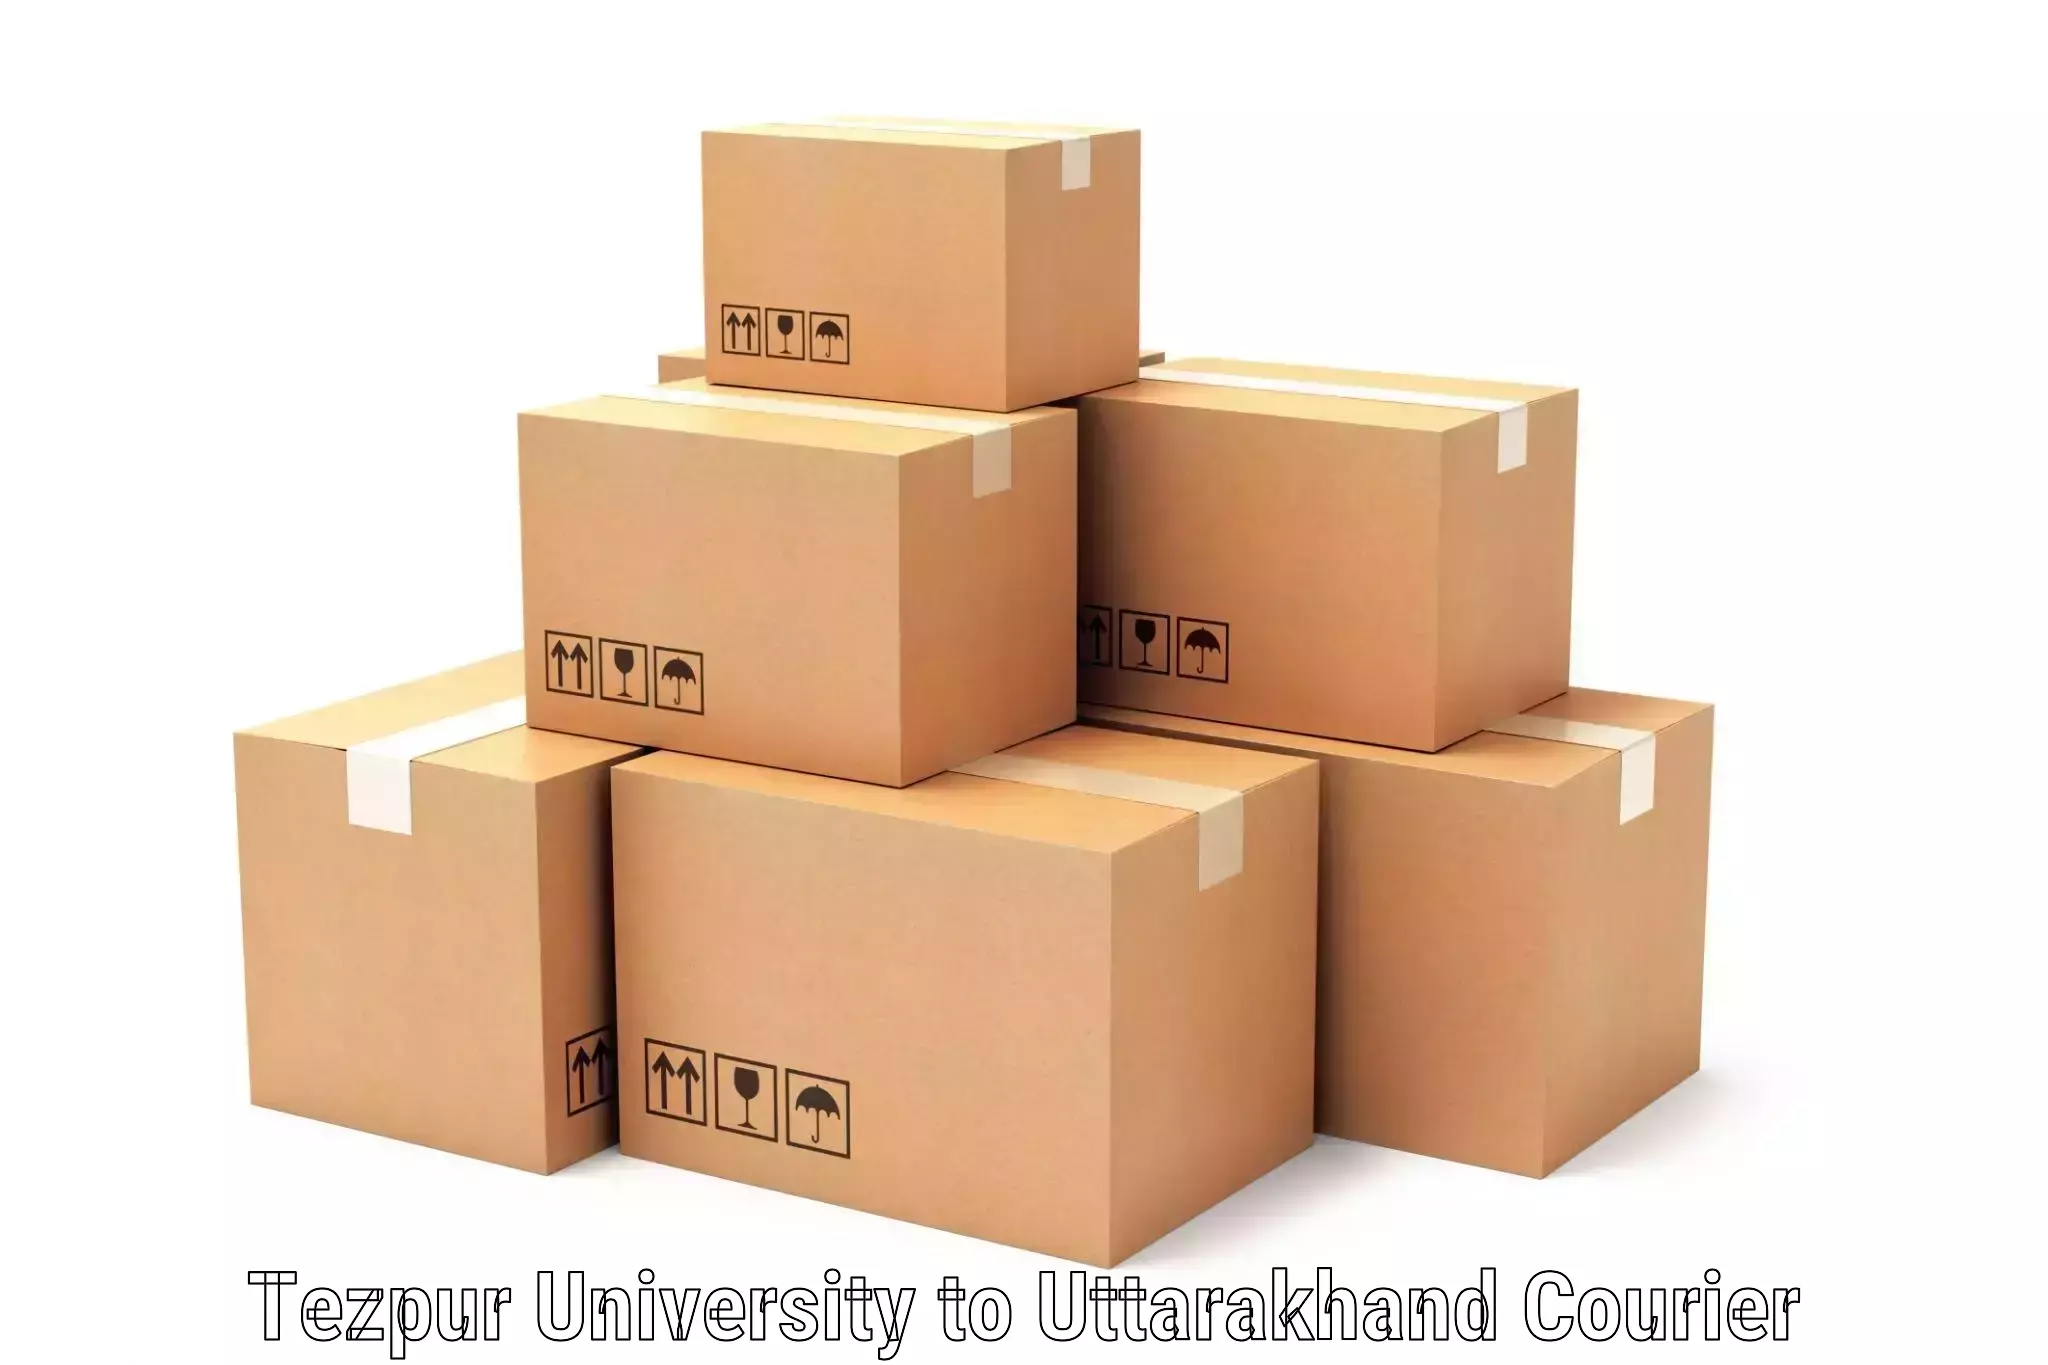 Expedited parcel delivery Tezpur University to Mussoorie